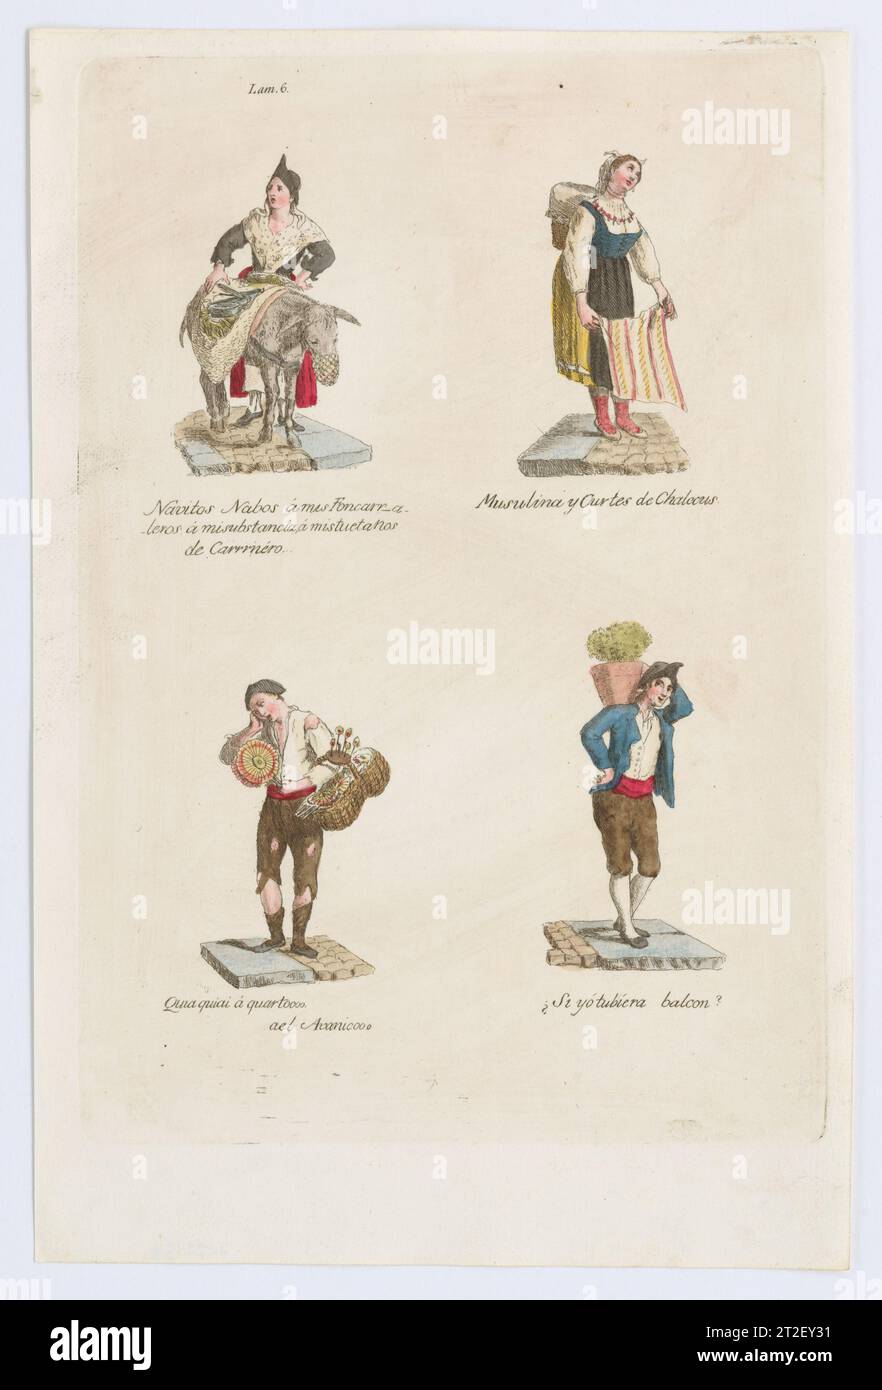 Plate 6: four street vendors from Madrid selling navitos, muslin, fans, plants, from 'Los Gritos de Madrid' (The Cries of Madrid) Miguel Gamborino Spanish Publisher Imprenta Real, Madrid Spanish 1809–17 See comment for 2022.53. View more. Plate 6: four street vendors from Madrid selling navitos, muslin, fans, plants, from 'Los Gritos de Madrid' (The Cries of Madrid). Miguel Gamborino (Spanish, Valencia 1760–1828 Madrid). 1809–17. Engraving with hand coloring. Imprenta Real, Madrid. Prints Stock Photo